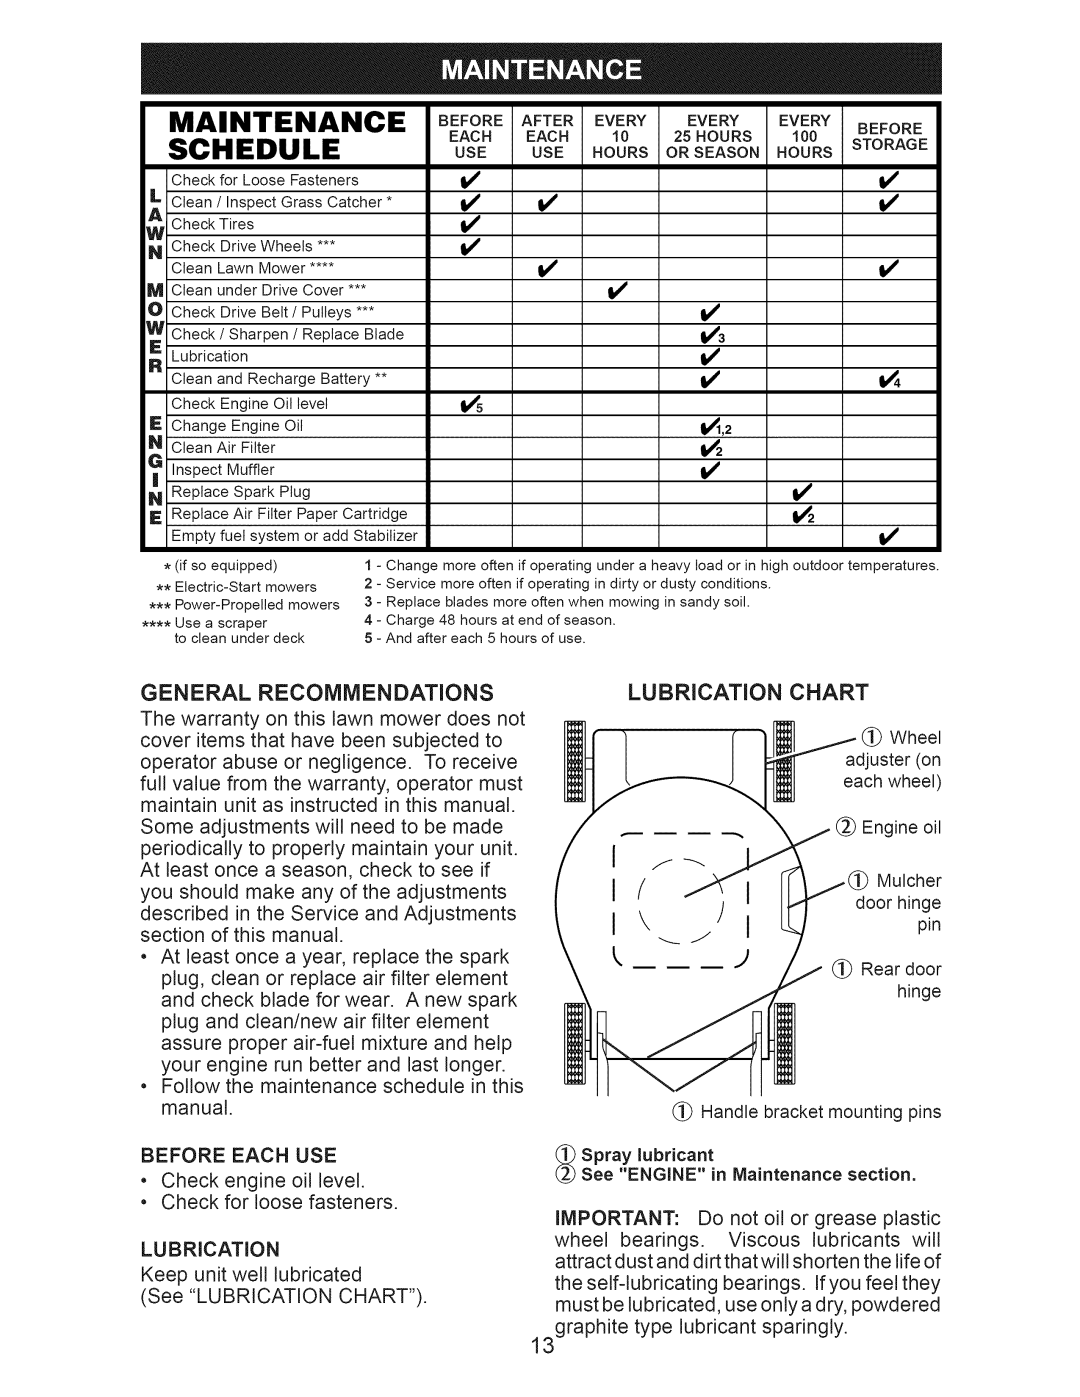 Craftsman 917.376533 owner manual Maintenance, Schedule, Use Hours 